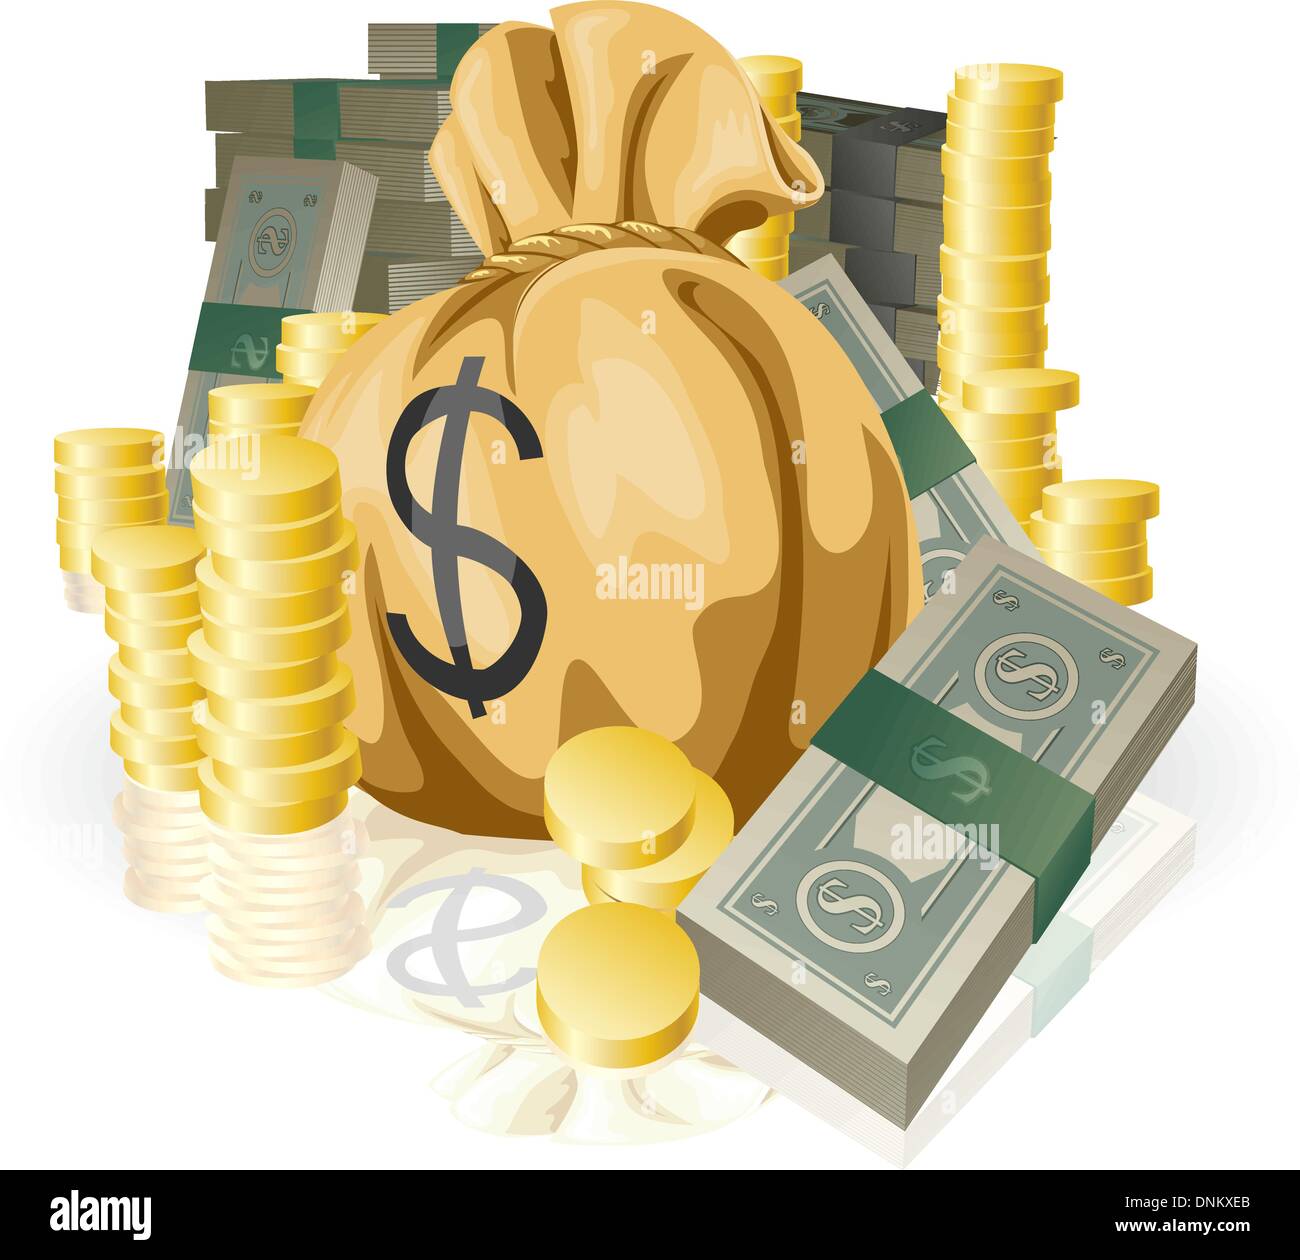 Piles of money in the form of cash and gold coins, with big money sack. Stock Vector